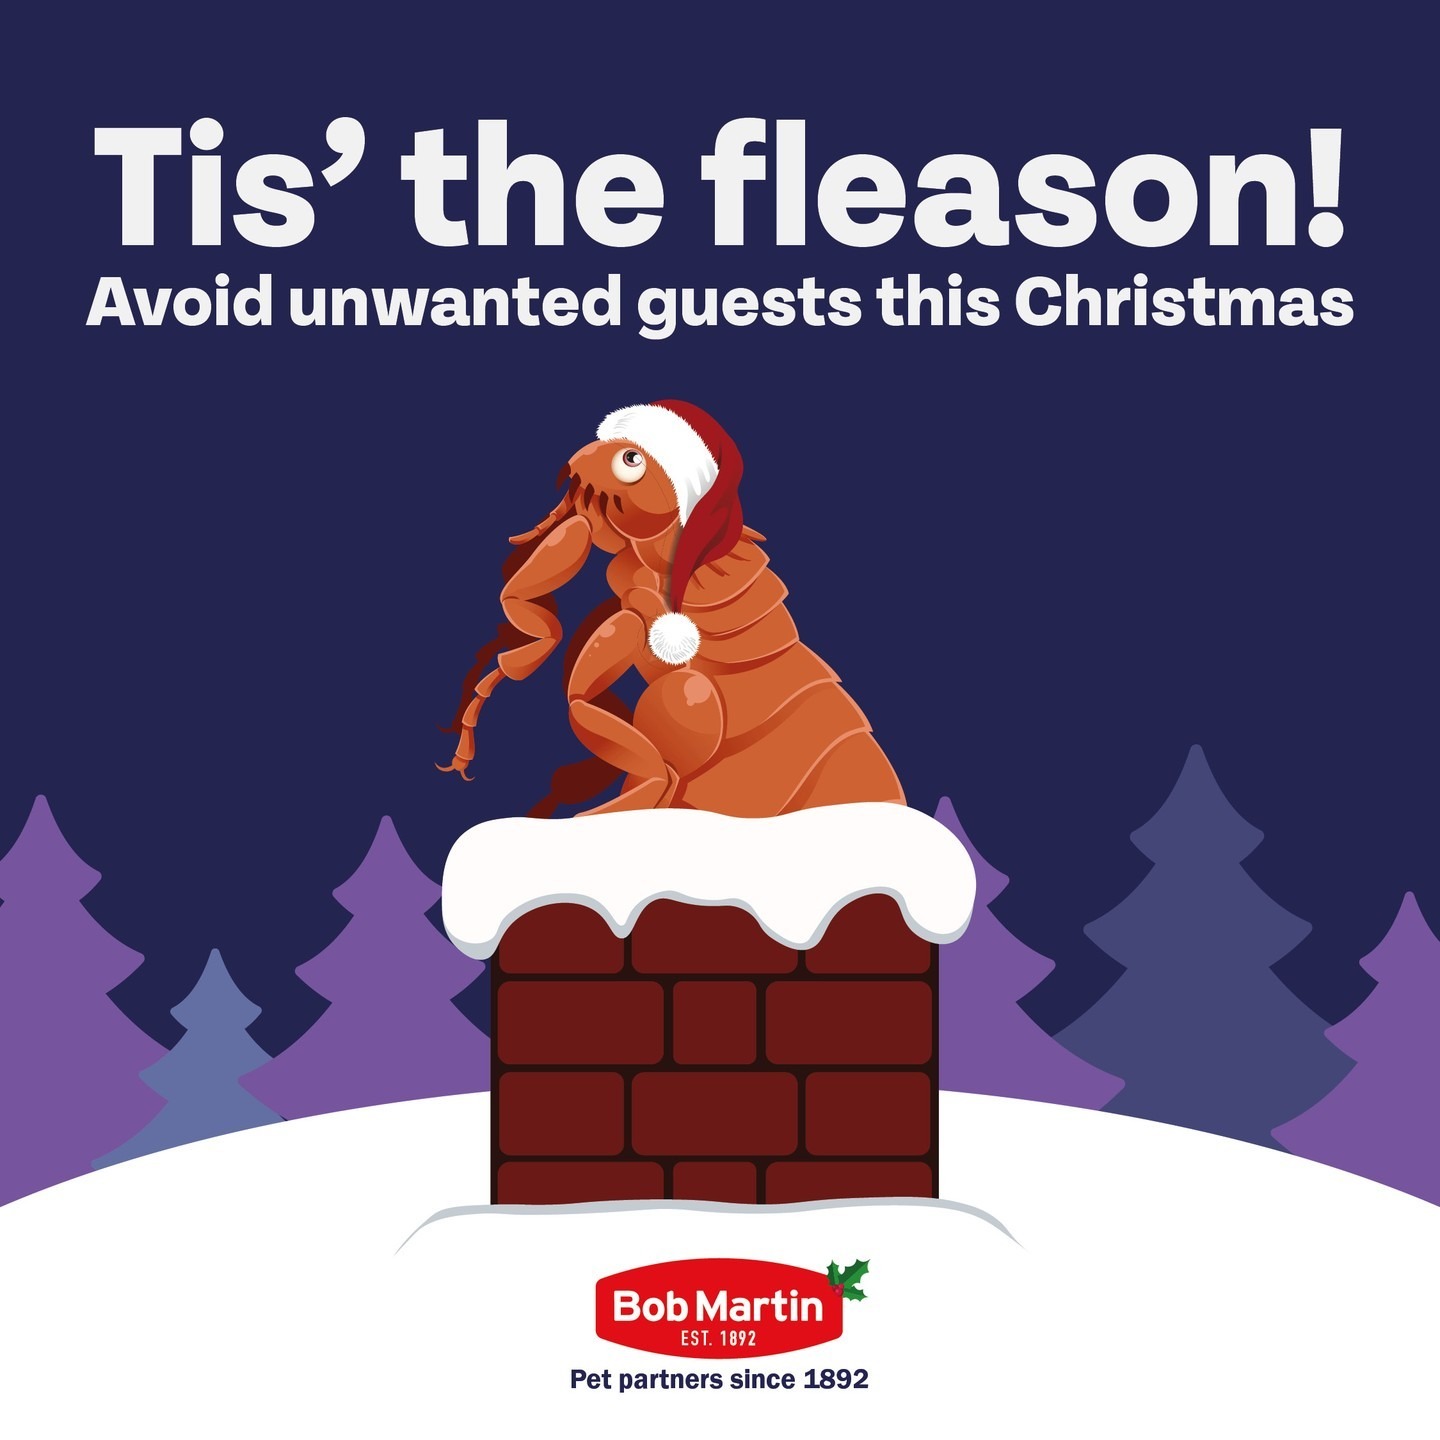 The last thing you want on Christmas day is unwanted guests... Keep your pet and home protected this festive ‘fleason’ with our range of vet-strength treatments.

 #BobMartin #PetHealthcare #Flea #Worm #Dog #Cat #SpotOn #Pets #PetsOfInstagram #PetCare #PetTips #PetHealth #HealthyPets #ActivePets